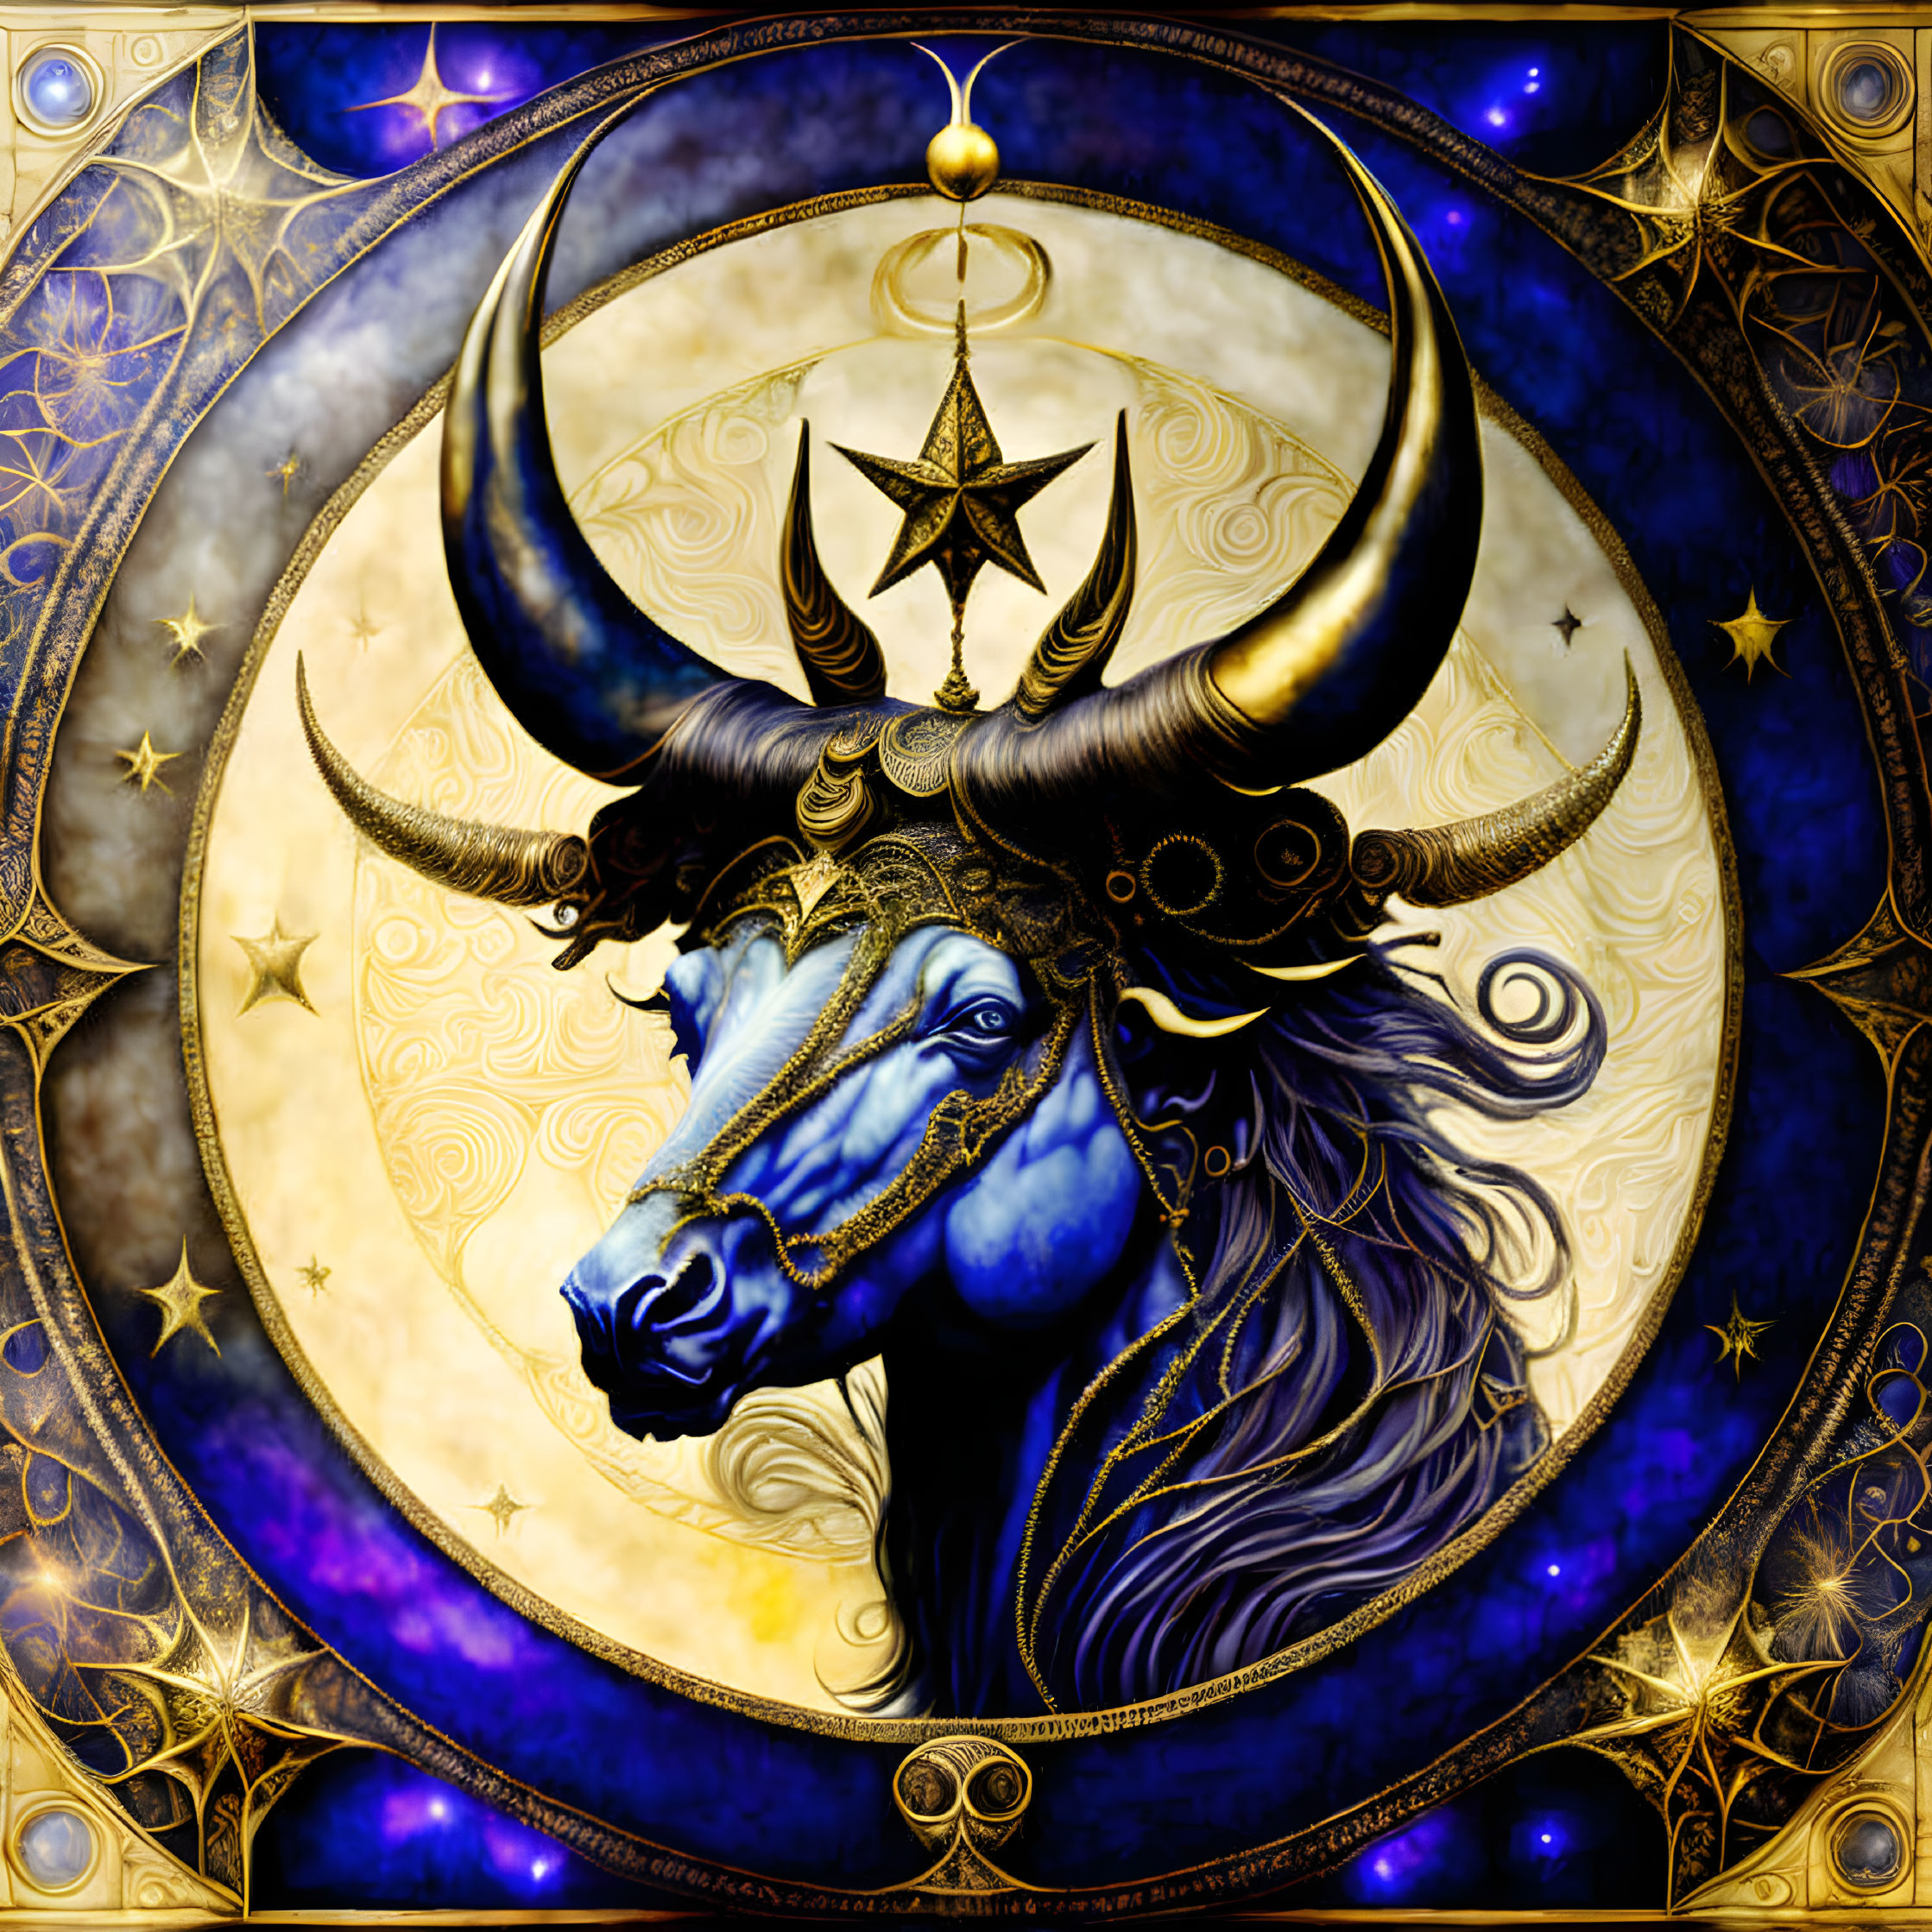 Celestial-themed bull's head with golden horns on blue and gold background